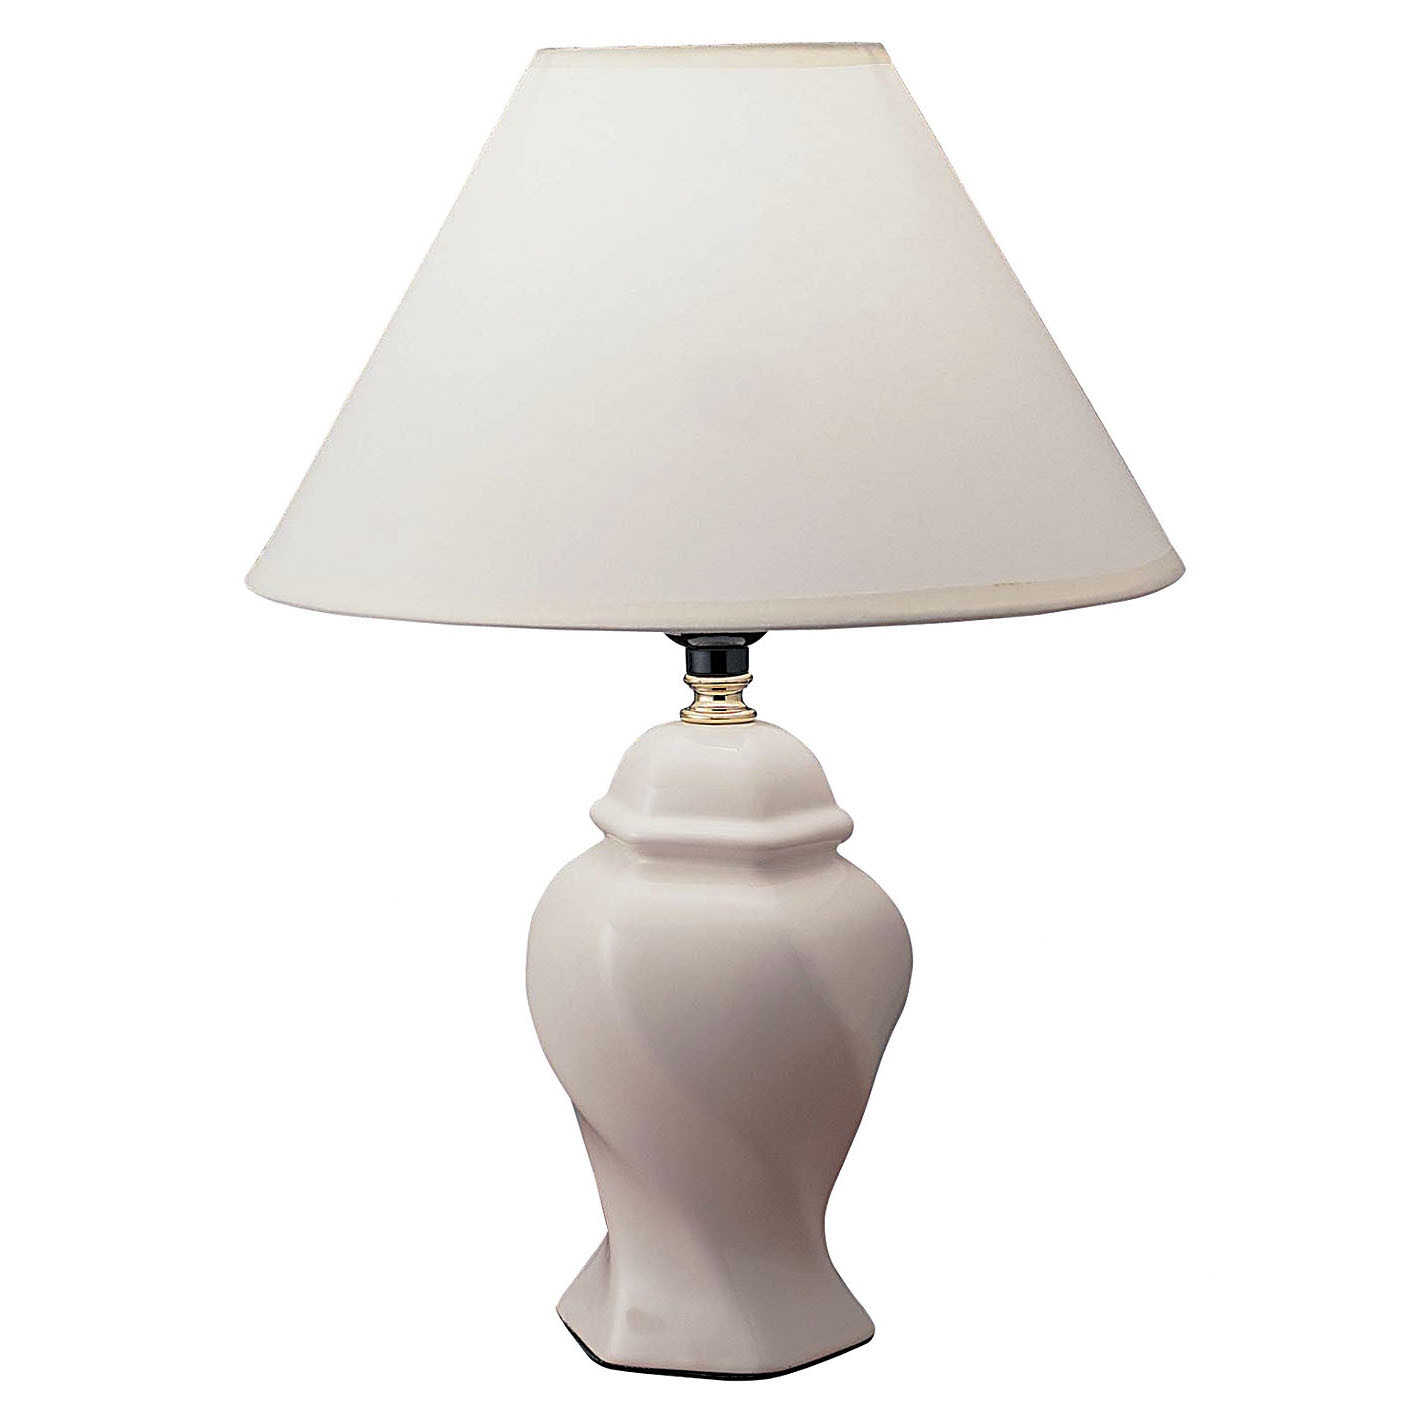 H Table Lamp with Empire Shade 